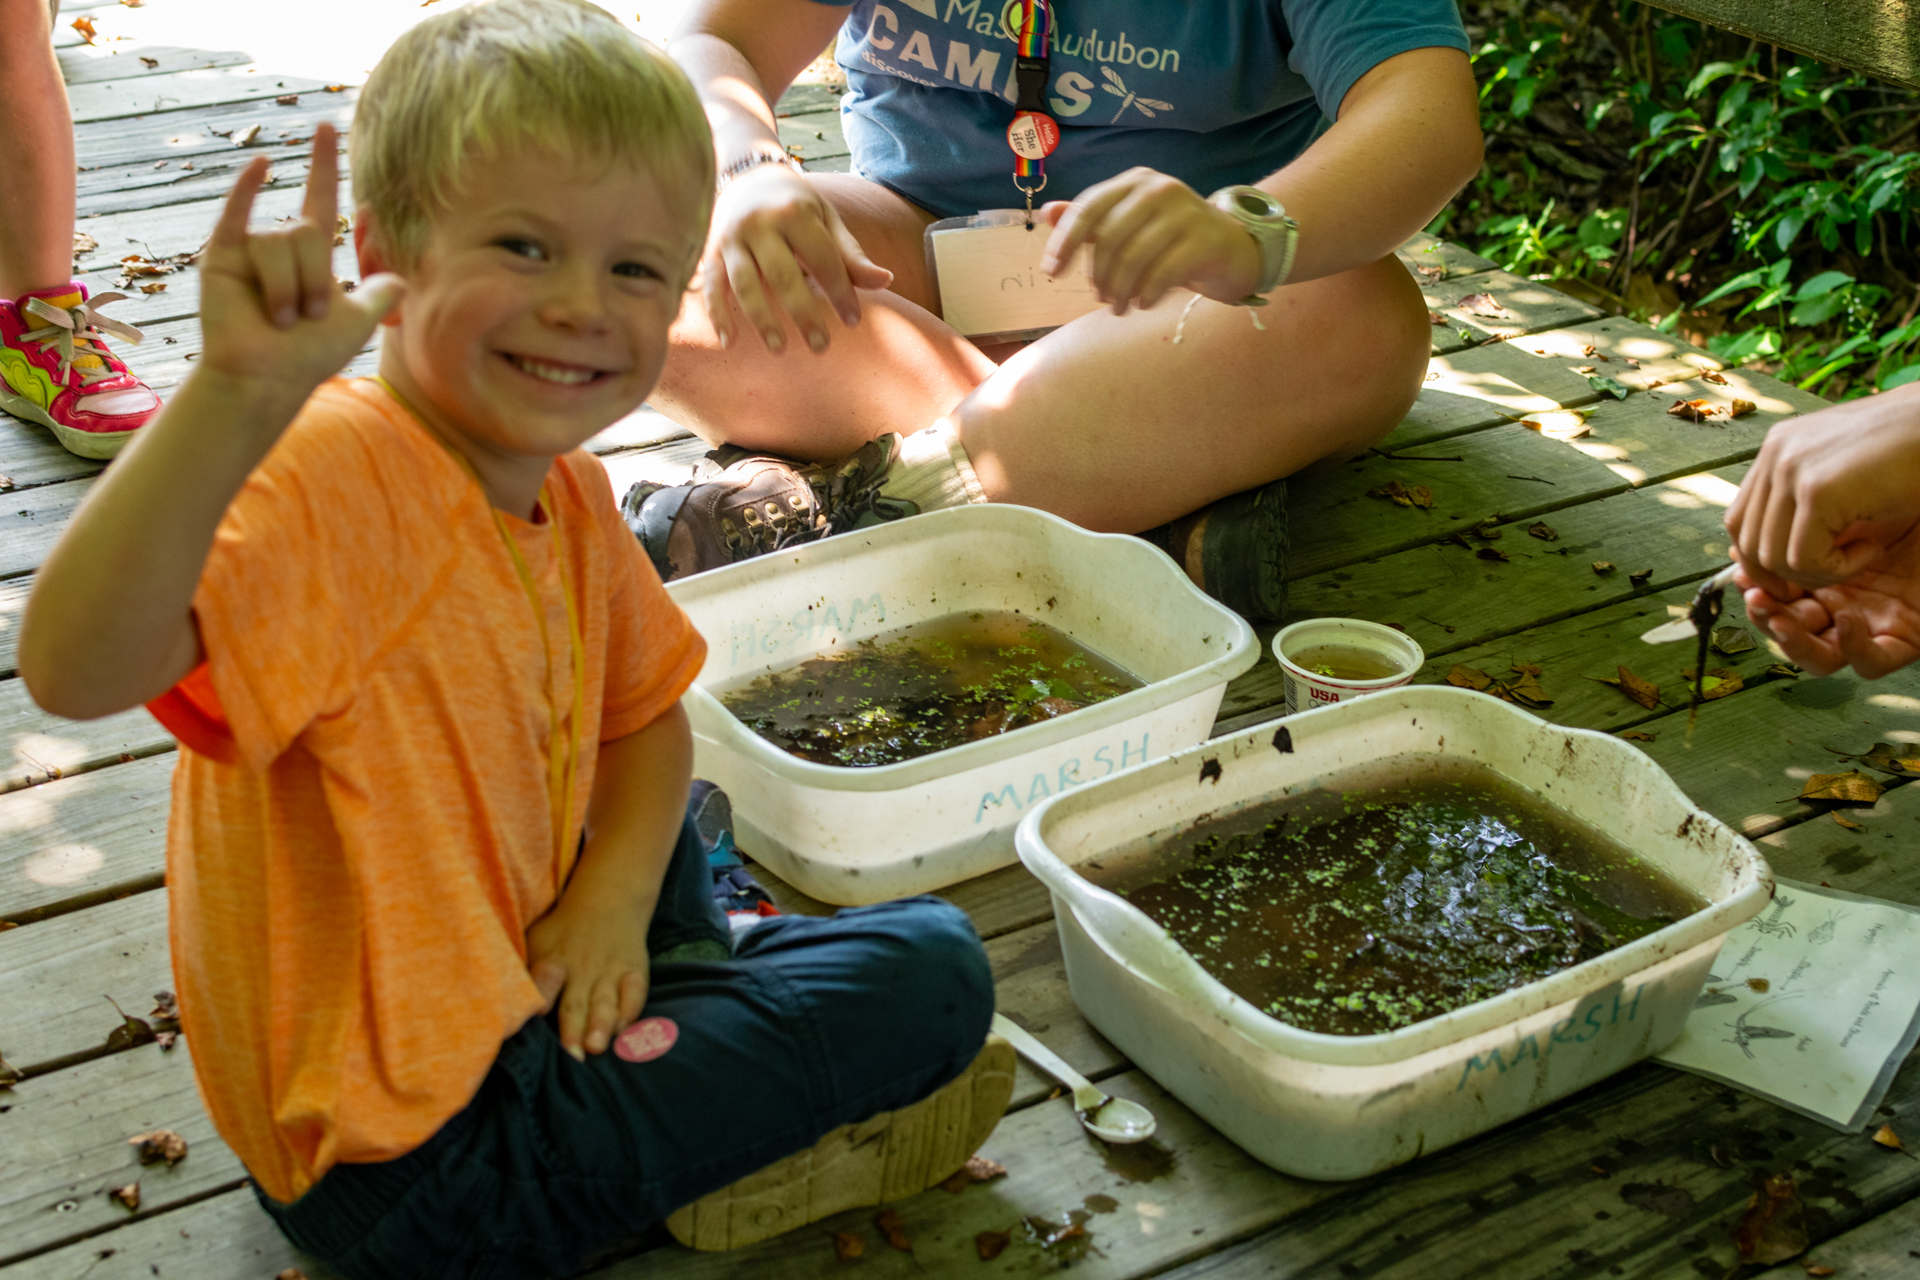 A smiling Broadmoor camper wearing an orange t-shirt sits cross-legged on a wooden boardwalk in front of two white plastic tubs containing water, mud, and aquatic plants. He is turned toward the camera and is making an "I love you" sign with his hand.